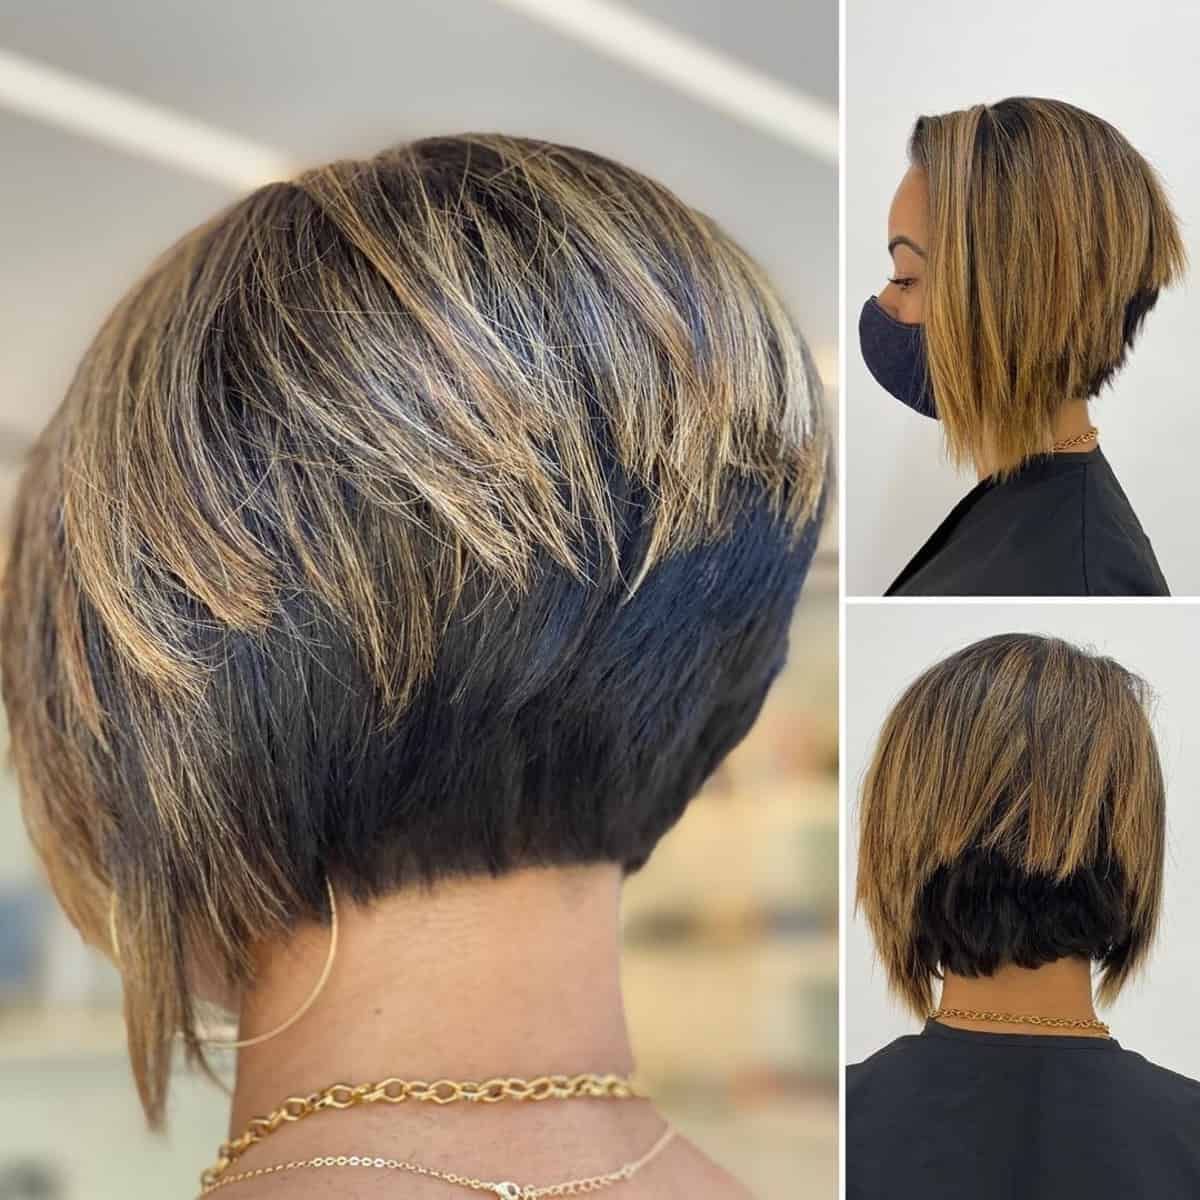 Top 16 Short Inverted Bob Haircuts Trending In 2022 Regarding Angled Short Bob Hairstyles (View 5 of 25)